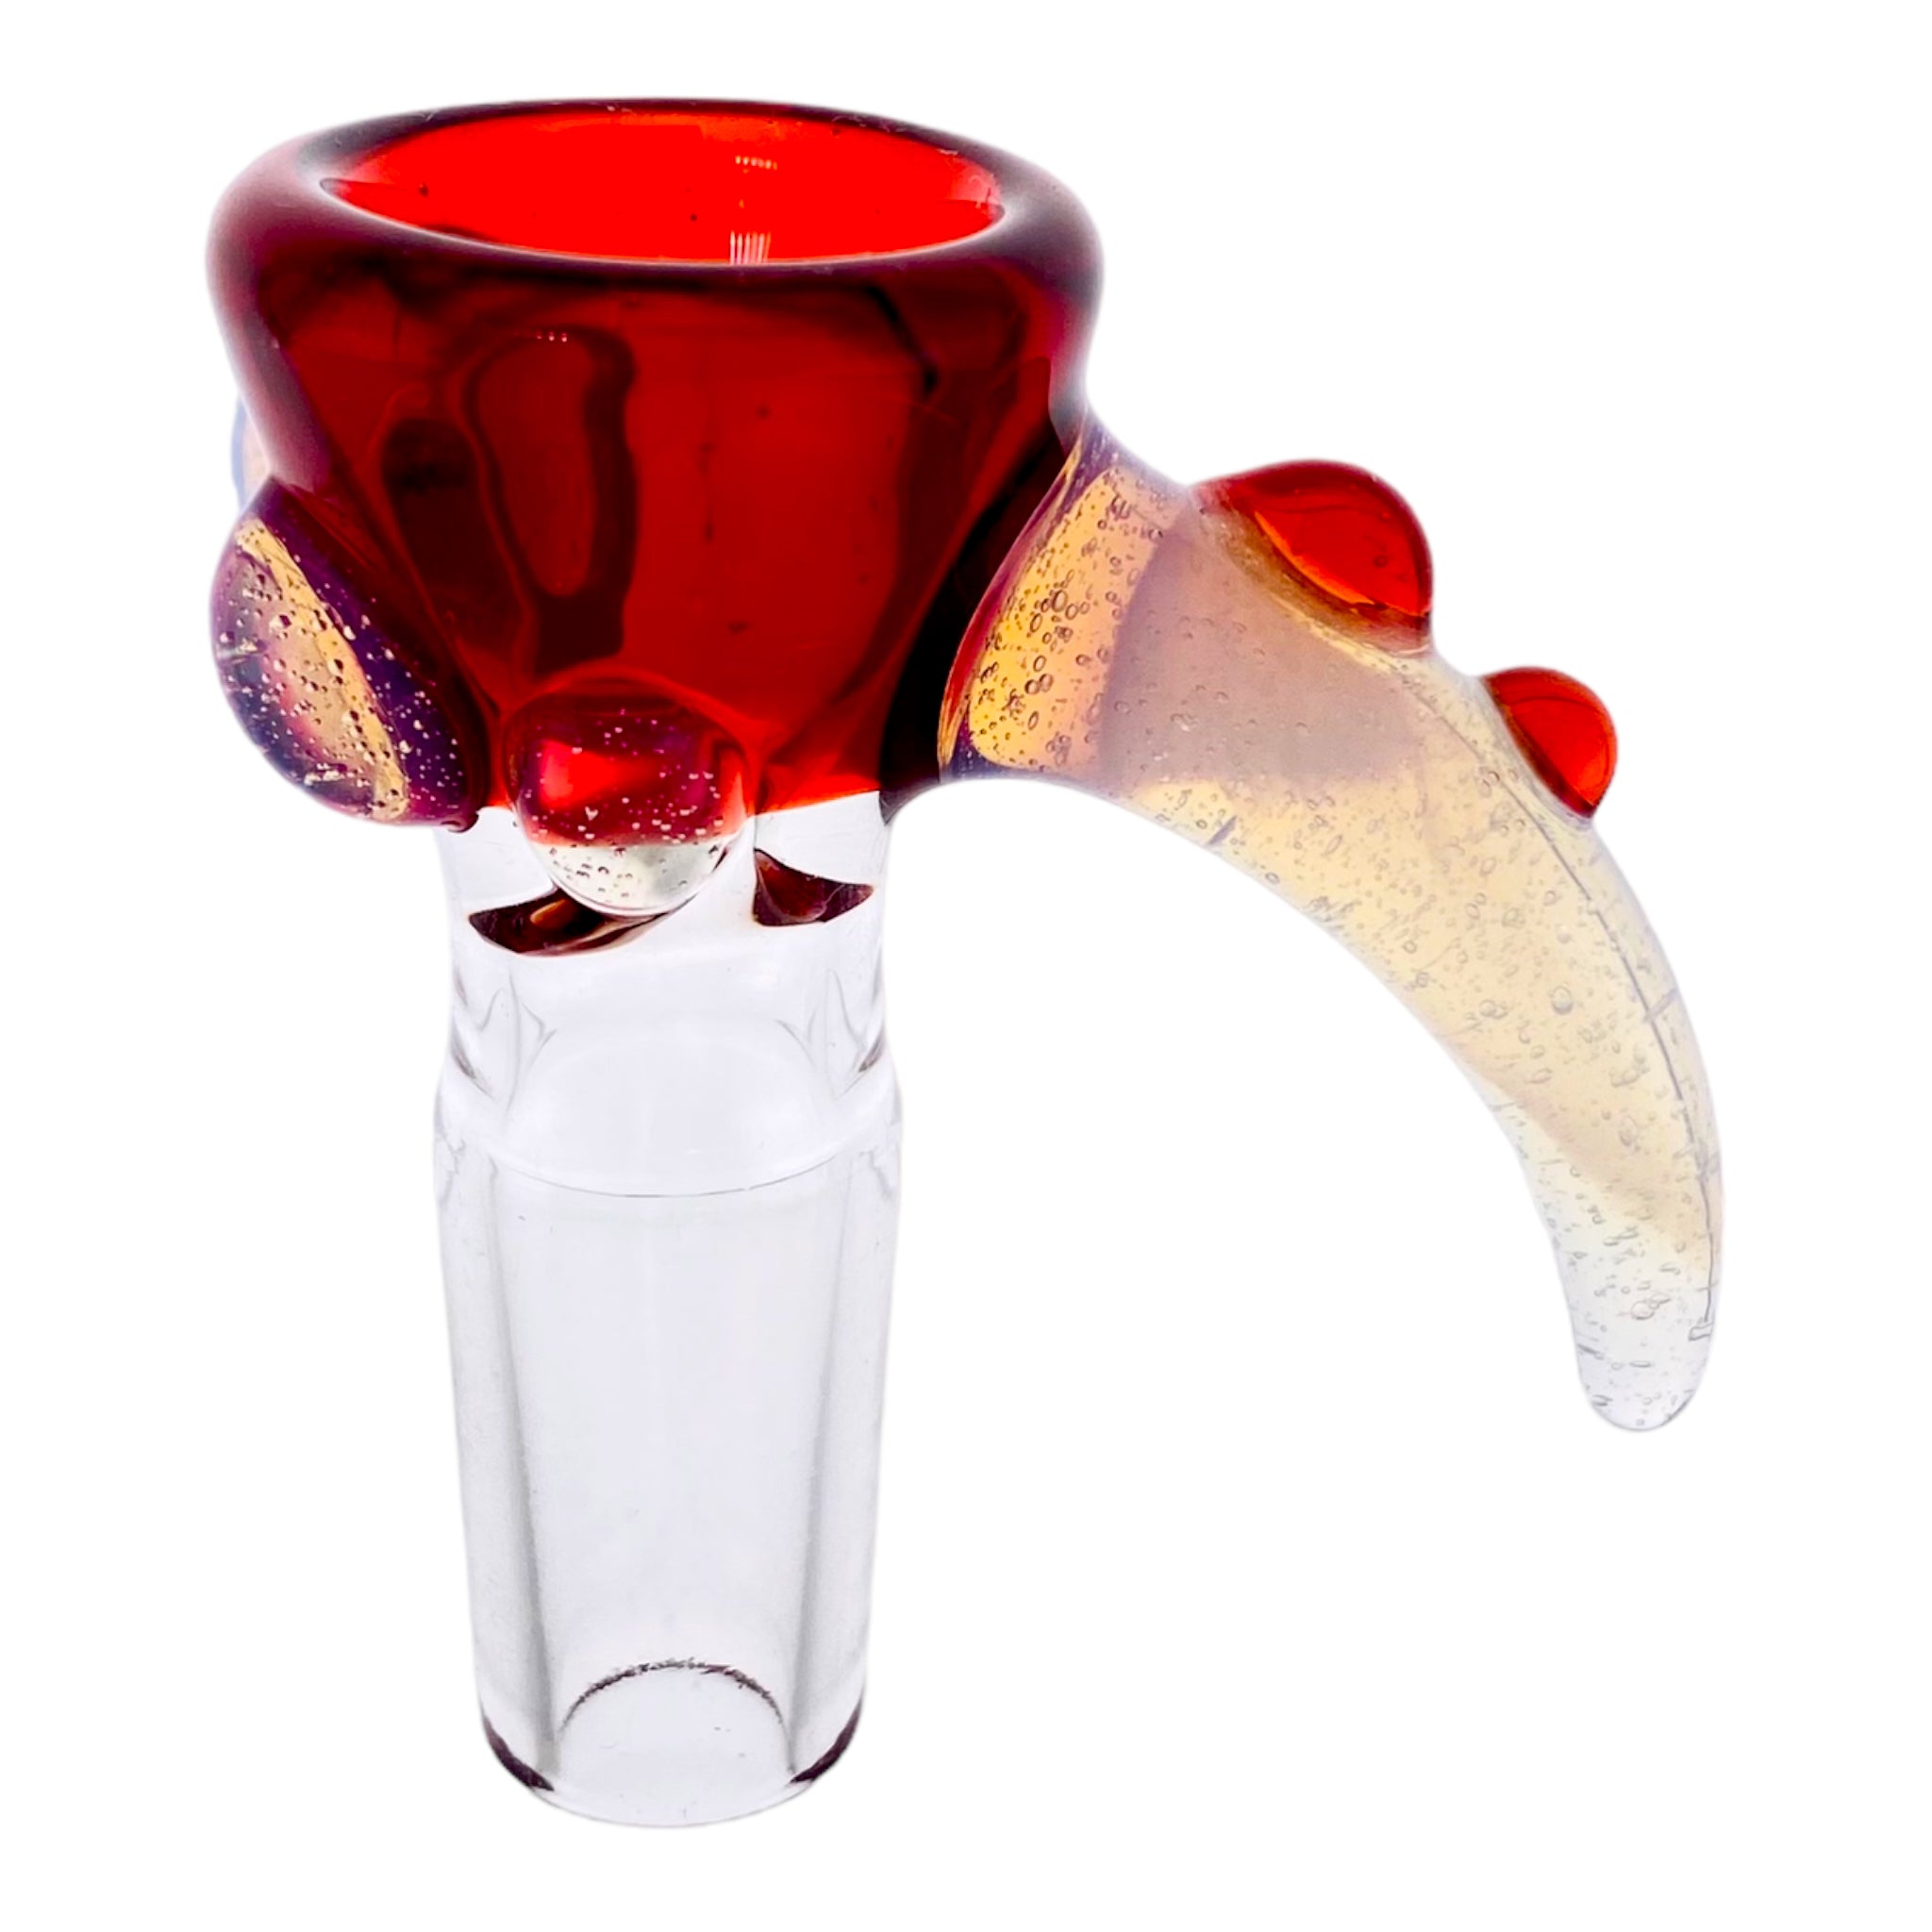 Arko Glass - 14mm Flower Bowl - Crimson Red With Mustic Fume Handle & Dots